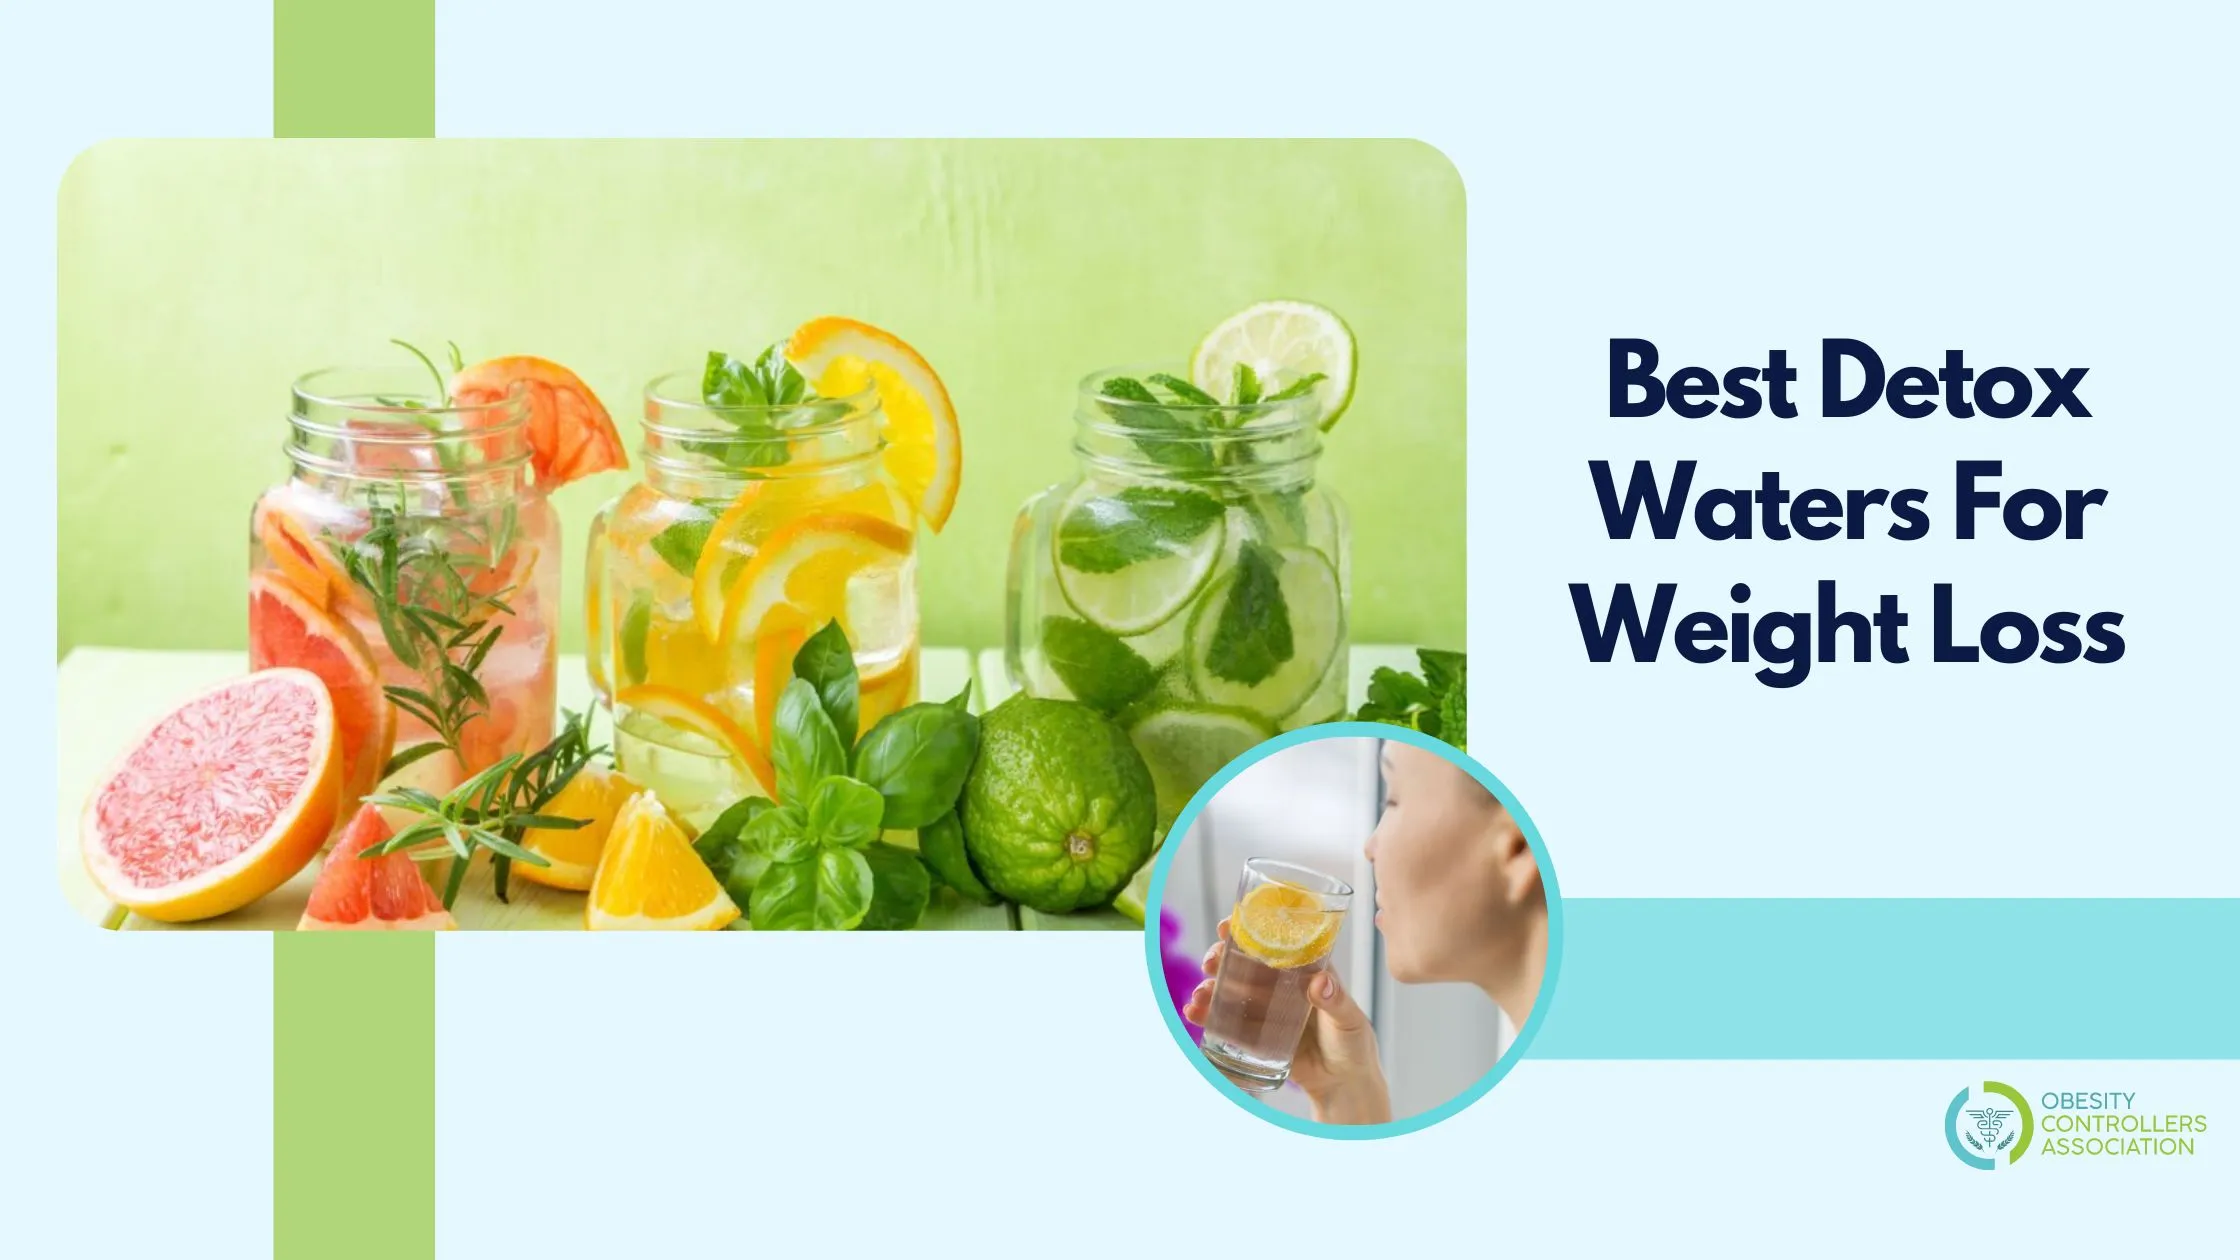 Best Detox Waters For Weight Loss